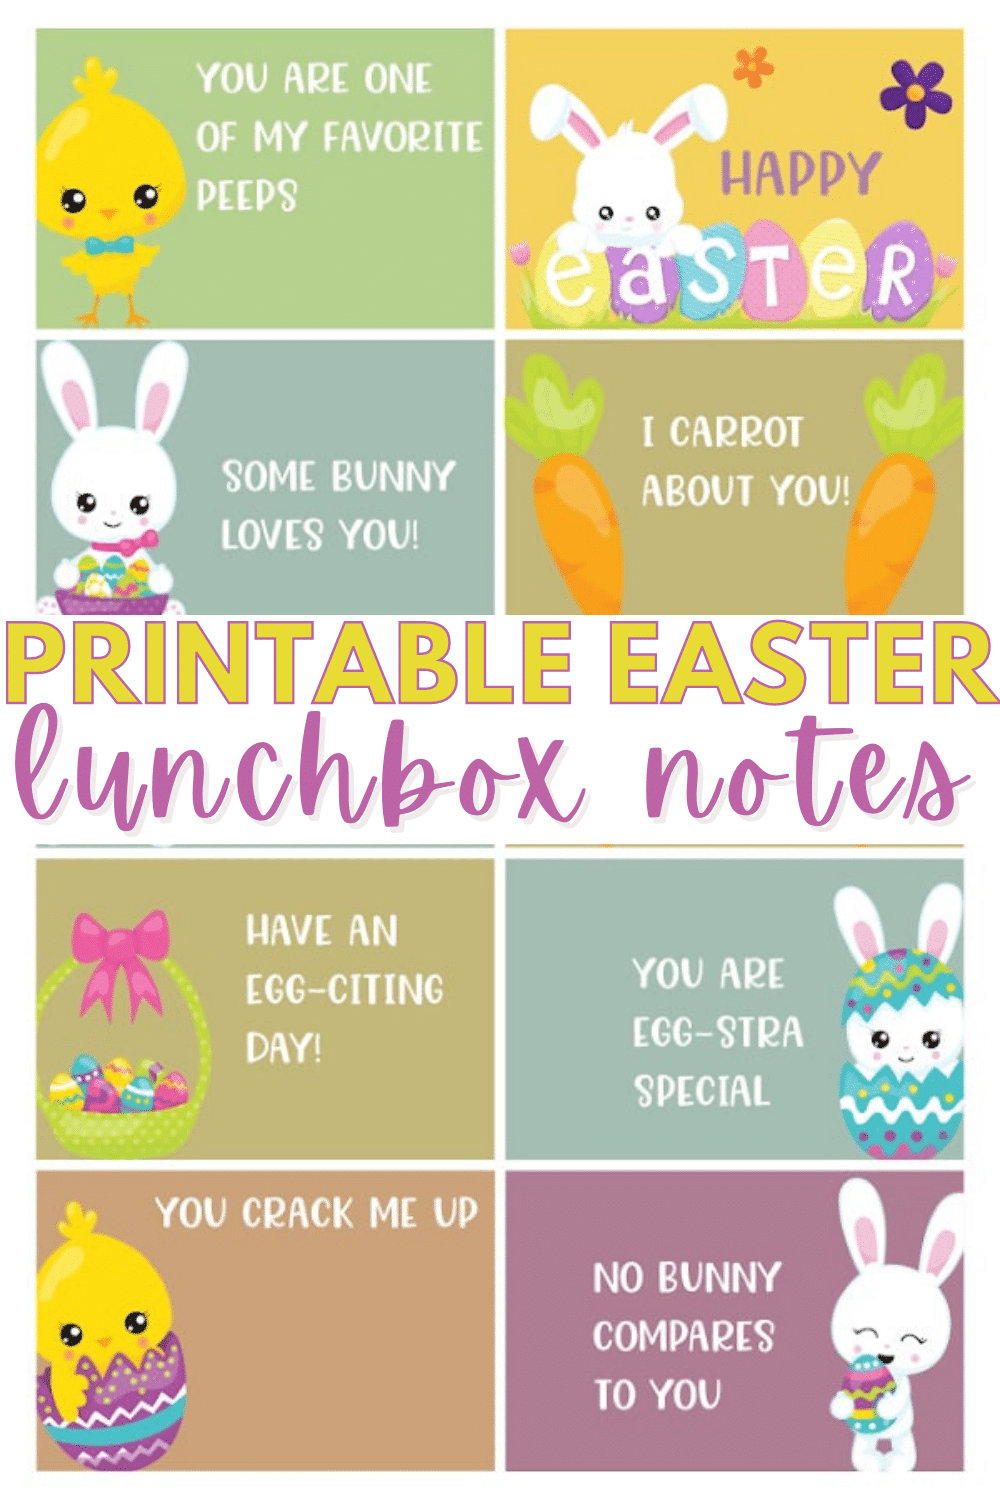 Free printable Easter lunchbox notes are the perfect way to brighten your child's day this spring. Add a printable lunchbox card to their lunch each day! #printables #easter #lunchboxnotes via @wondermomwannab